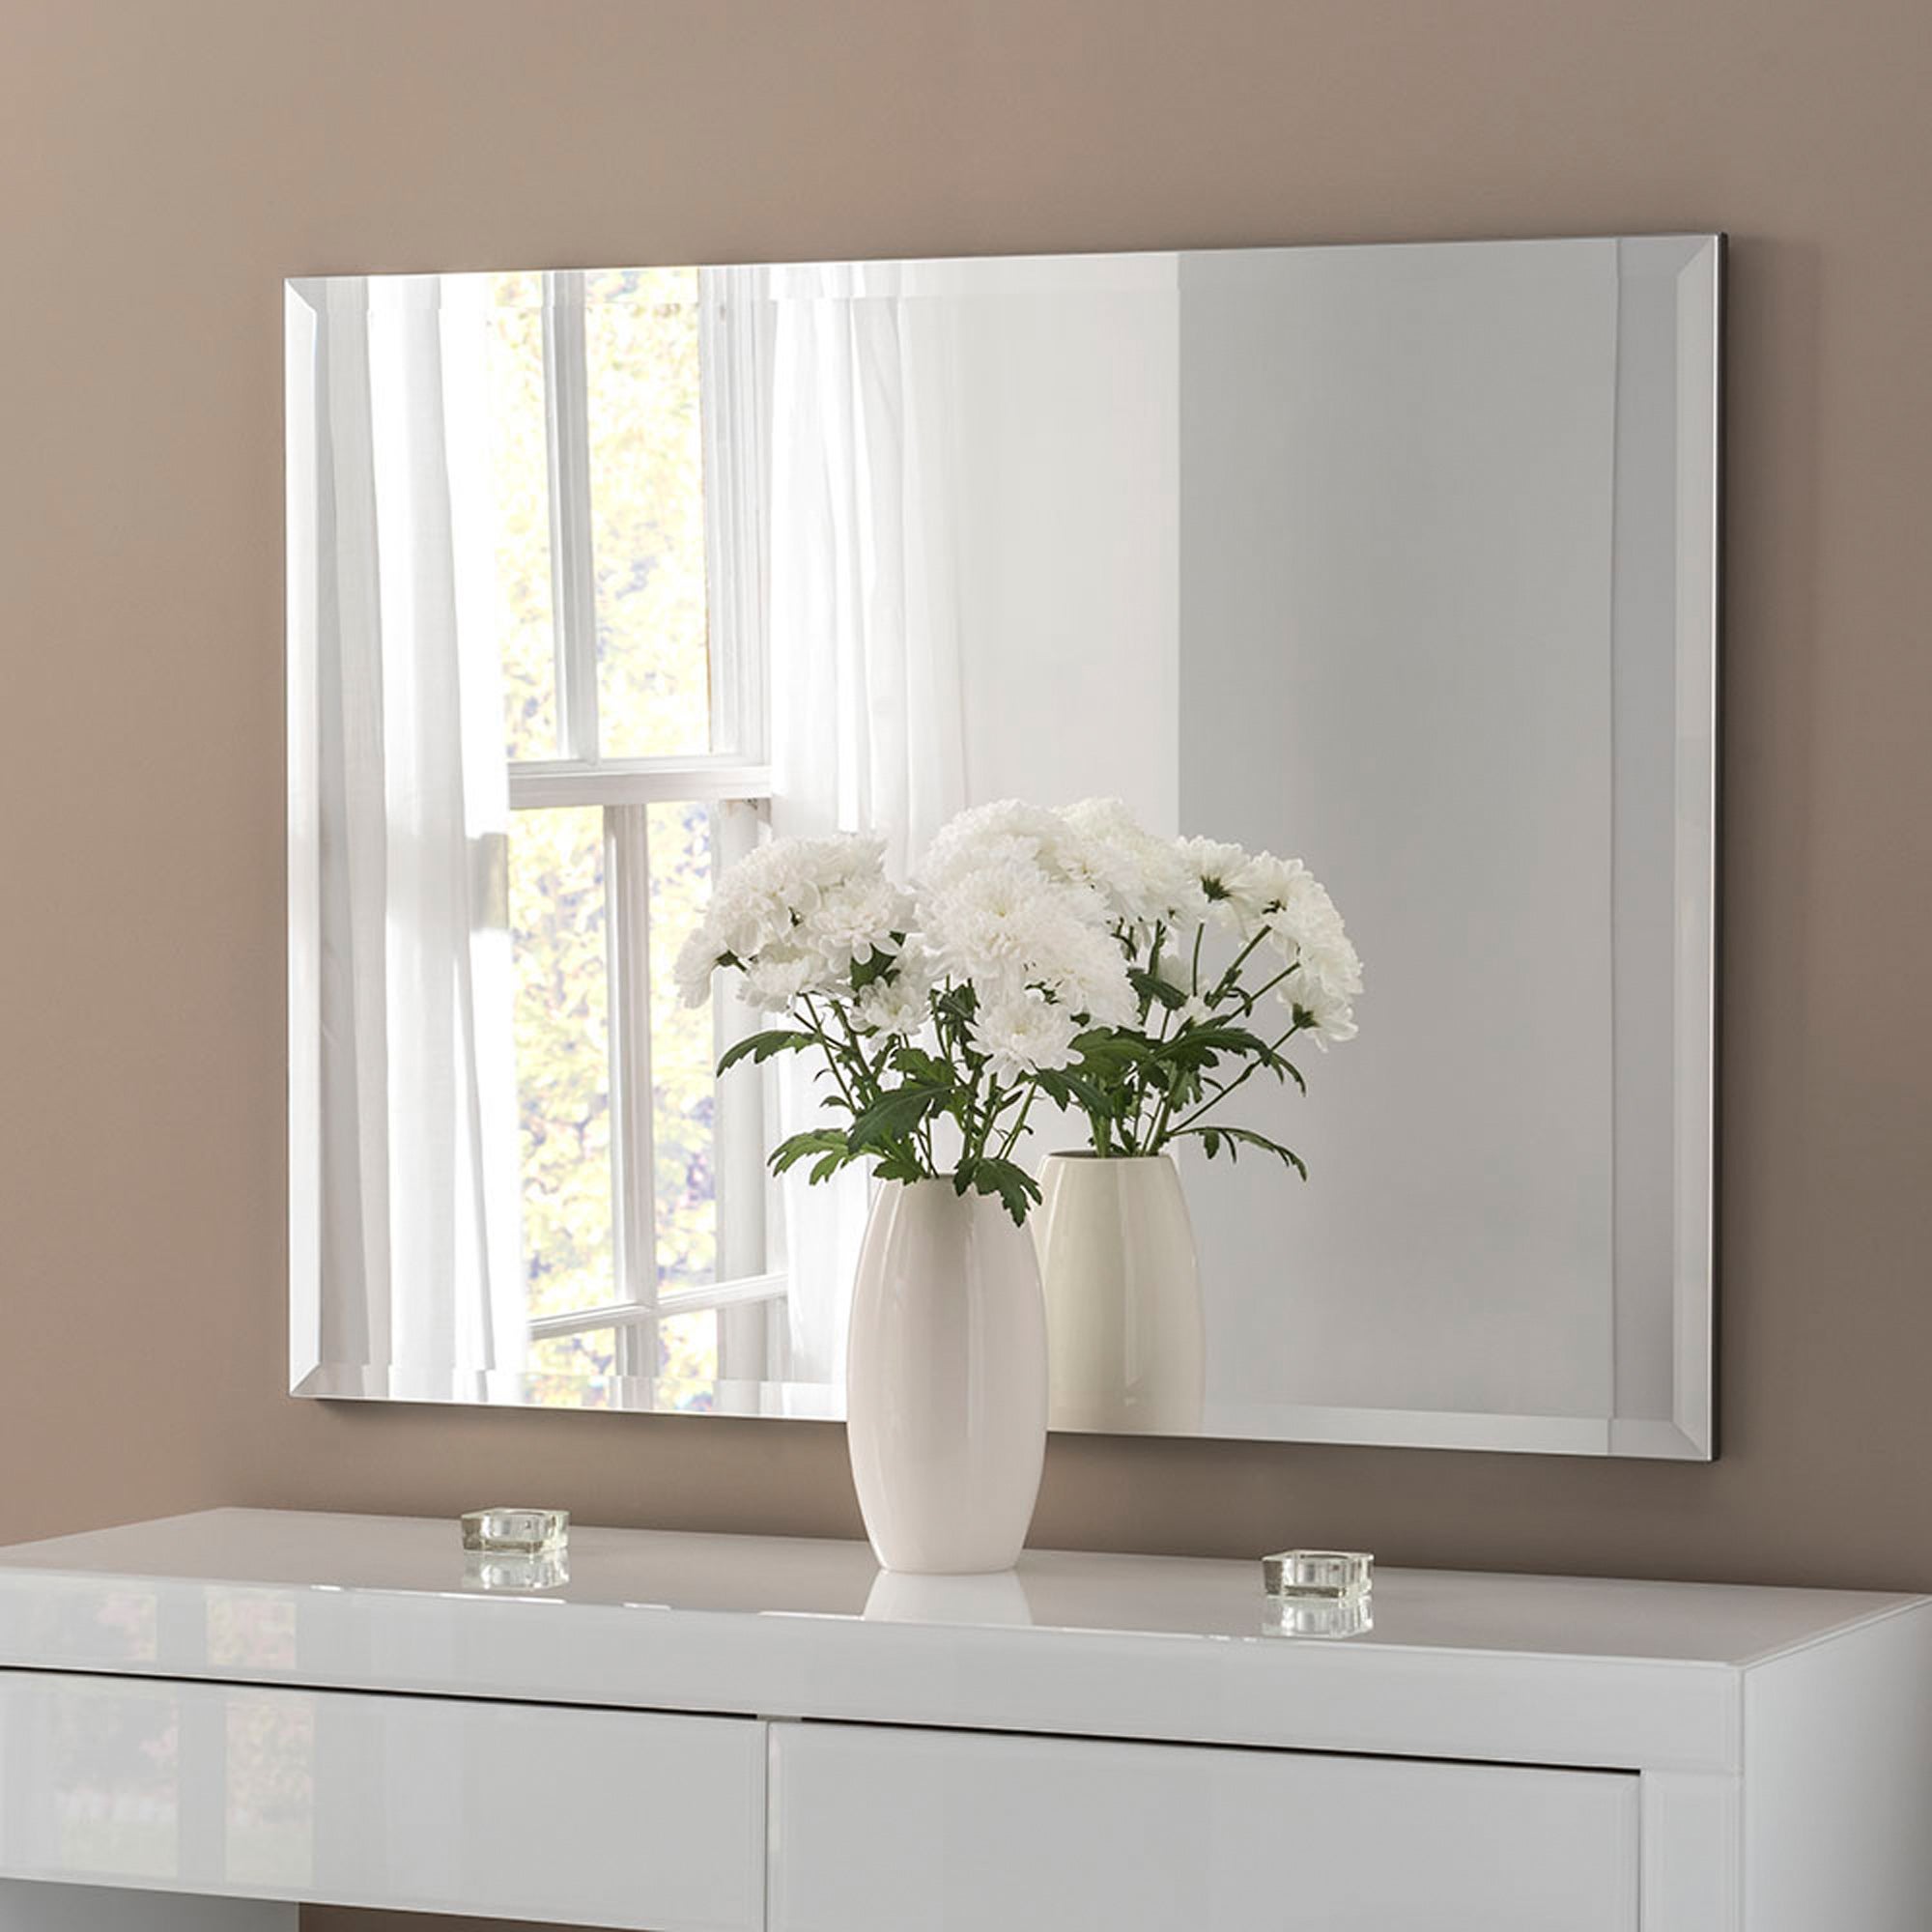 Yearn Bevelled Rectangle Overmantel Wall Mirror | Dunelm